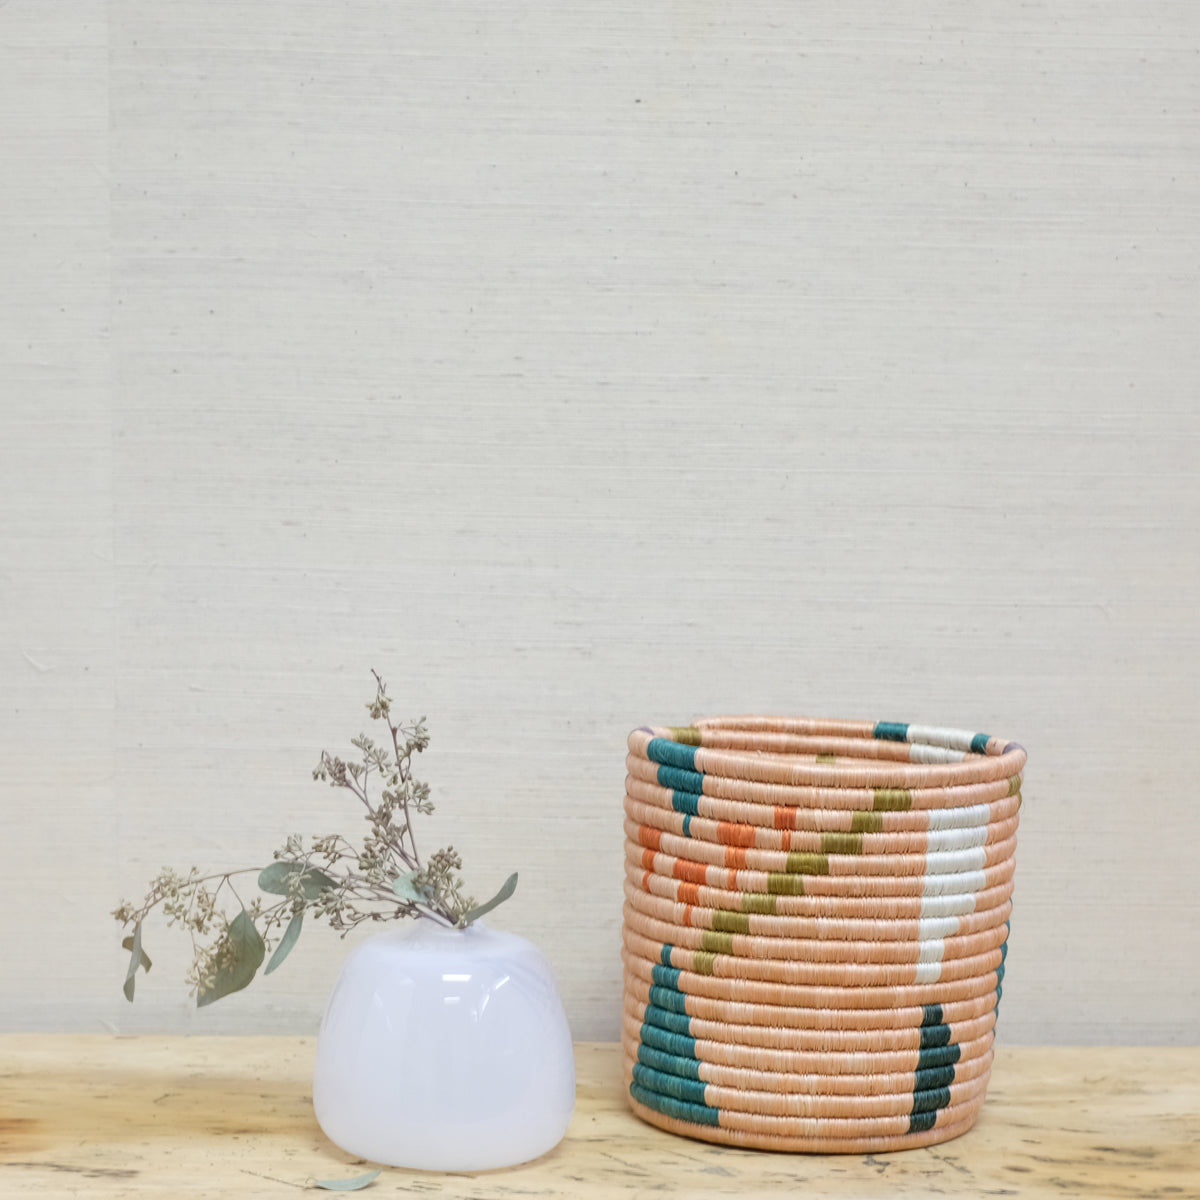 colorful handwoven grass basket next to white glass vase